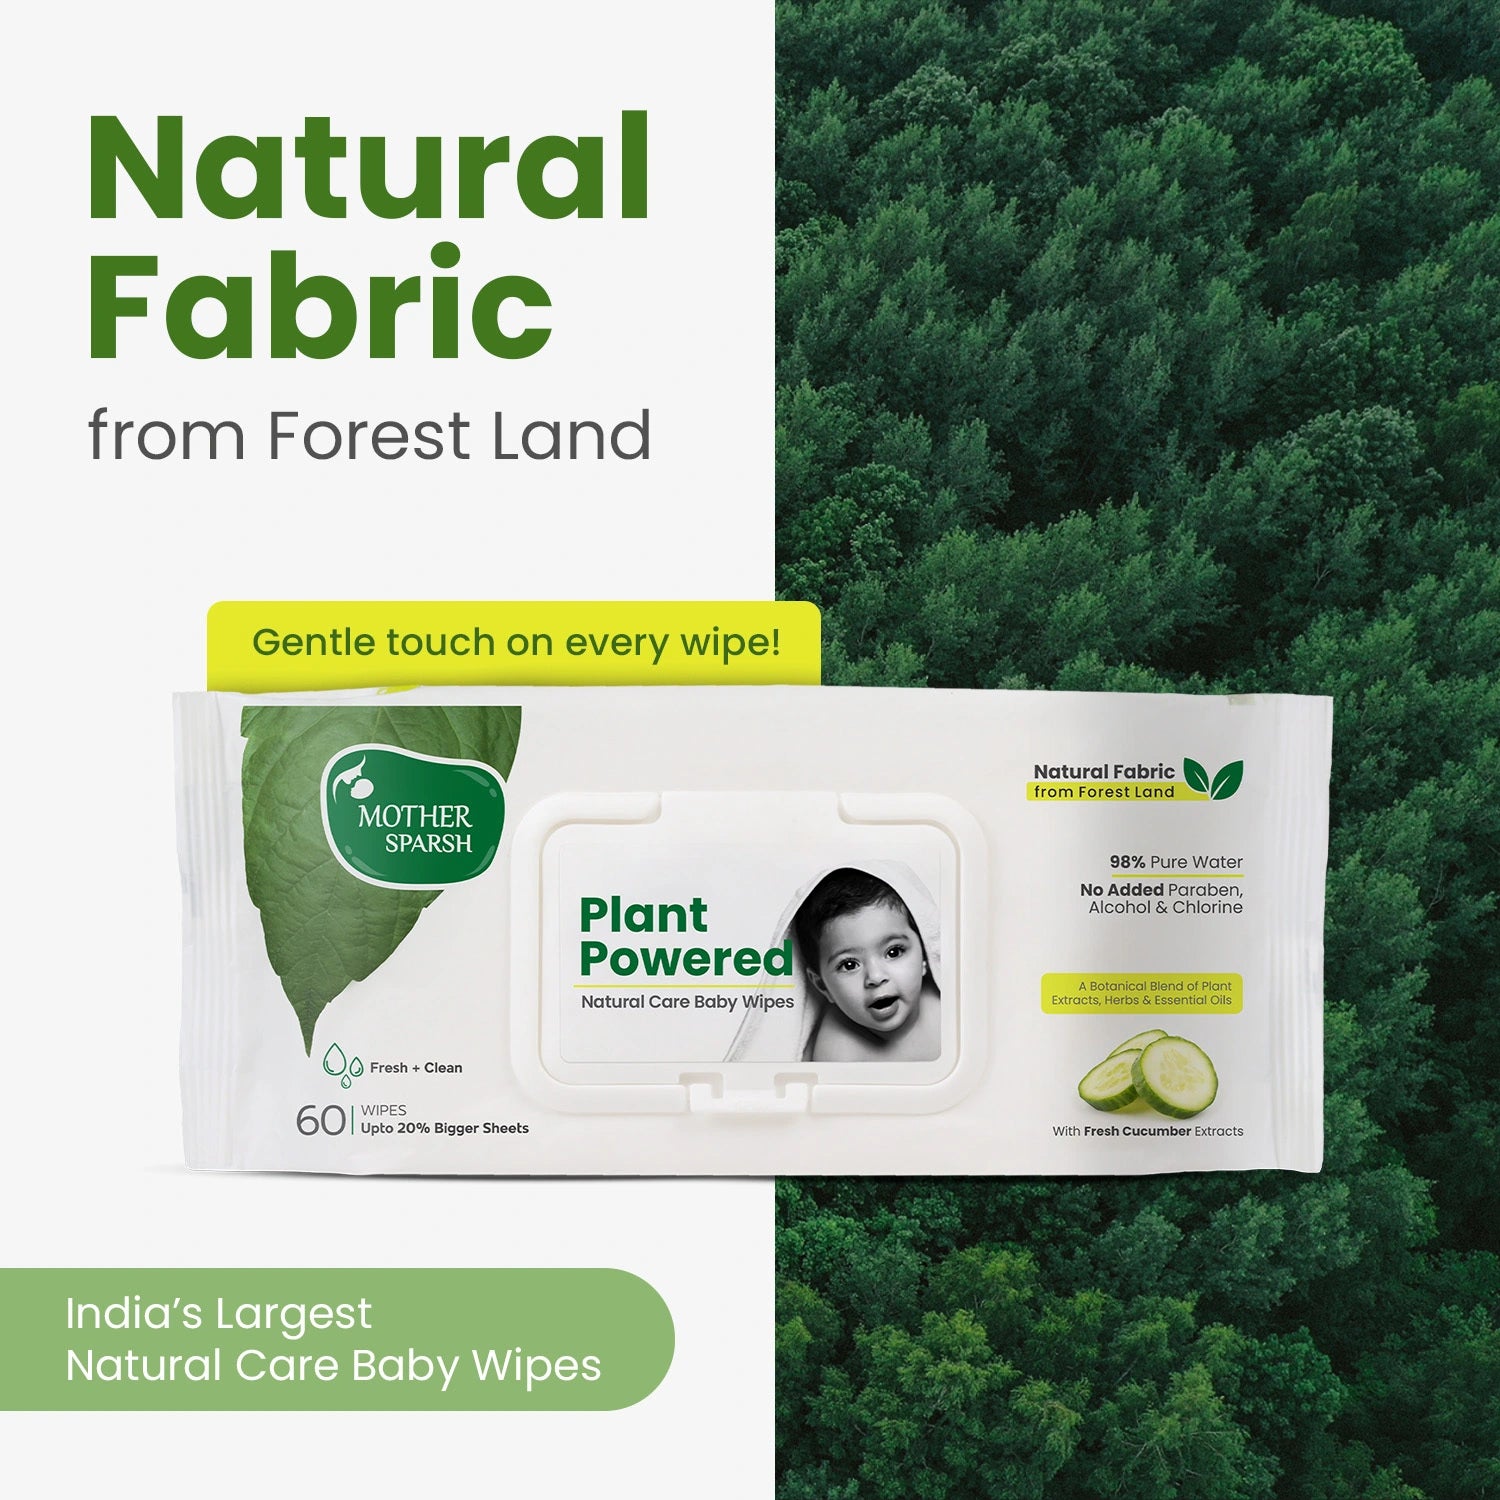 India’s Largest Natural Care Baby Wipes-made with natural fabric with refreshing cucumber 